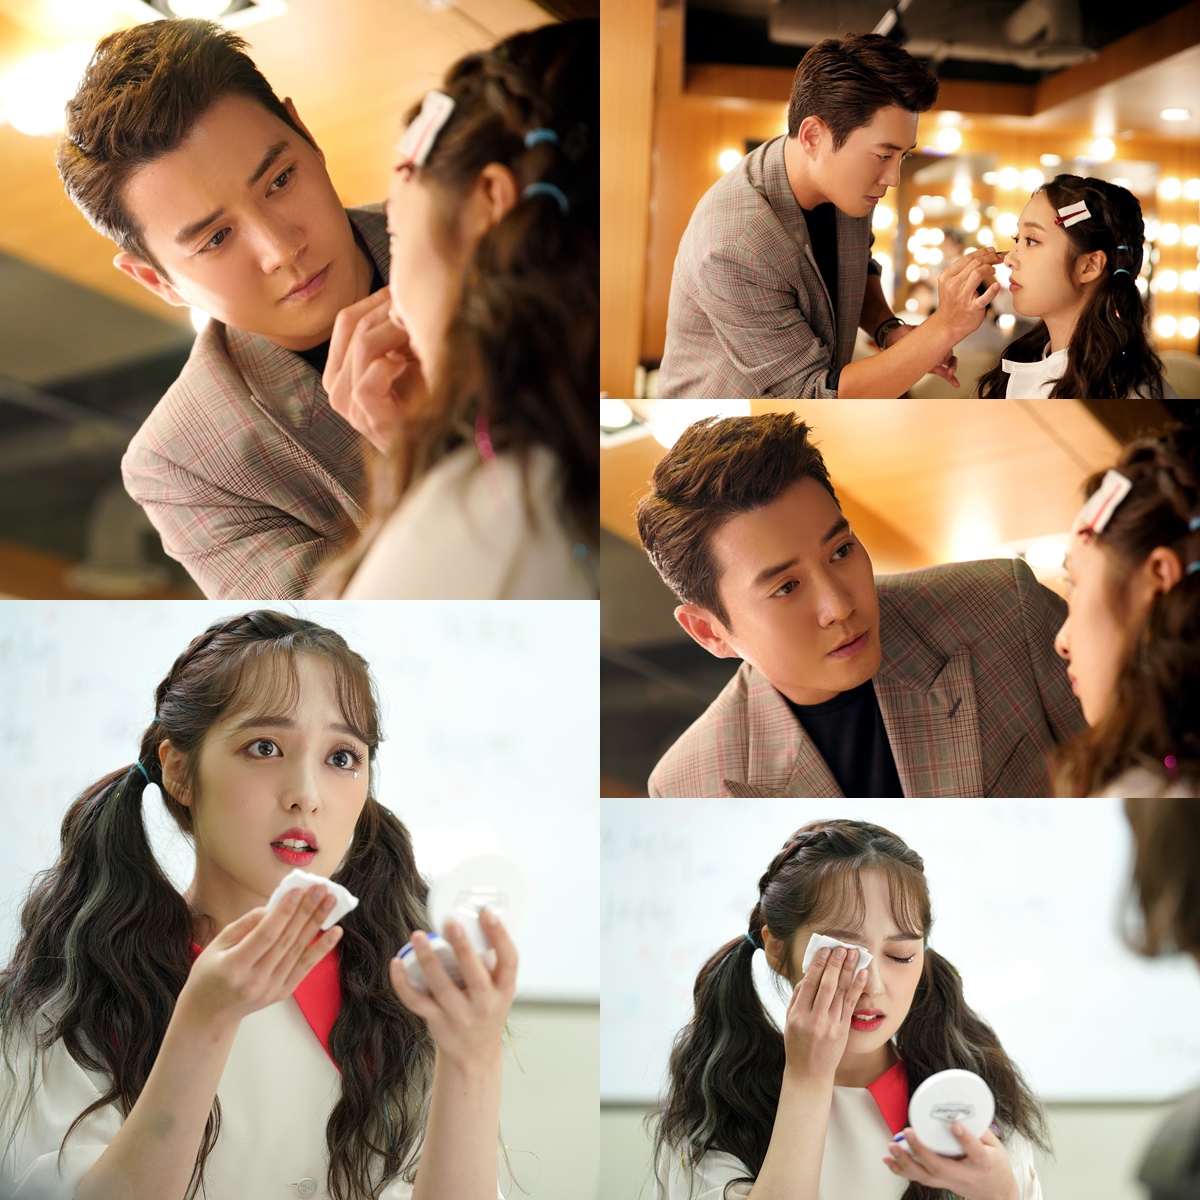 Ju Sang Wook and Kim Bo-ra are attracting viewers with their unpredictable first meeting.Cha Jong-hyok (Ju Sang Wook), who makes up his mind in the Channel A gilt drama Touch, which will be broadcasted on January 3, and Han Soo-yeon (Kim Bo-ra), who wants to erase makeup, are drawing interest from the house theater.Cha Jong-hyok is a person who pursues perfect beauty and has a special pride in his makeup skills.Among them, idol Idol producer Han Soo-yeon is touching his makeup and foreshadowing an extraordinary conflict.Cha Jong-hyok, who saw Han Soo-yeon, who erased his makeup, is expected to give exciting reactions with a fierce reaction.In addition, Han Soo-yeon is forced to make a bold choice in a situation ahead of an important stage in her life, amplifying the curiosity of the viewers about what she could not say.As such, Ju Sang Wook and Kim Bo-ra have caught the attention of the house theater by creating an unusual air current from the first meeting of the drama.Meanwhile, the drama Touch will convey both impression and excitement with a super-close beauty romance where makeup artists who have fallen into debt-ridden unemployed and Idol Producer, who failed to debut the idol, meet to find new dreams.It will be broadcasted at 10:50 pm on January 3.Photo = MI, StoryNetwix